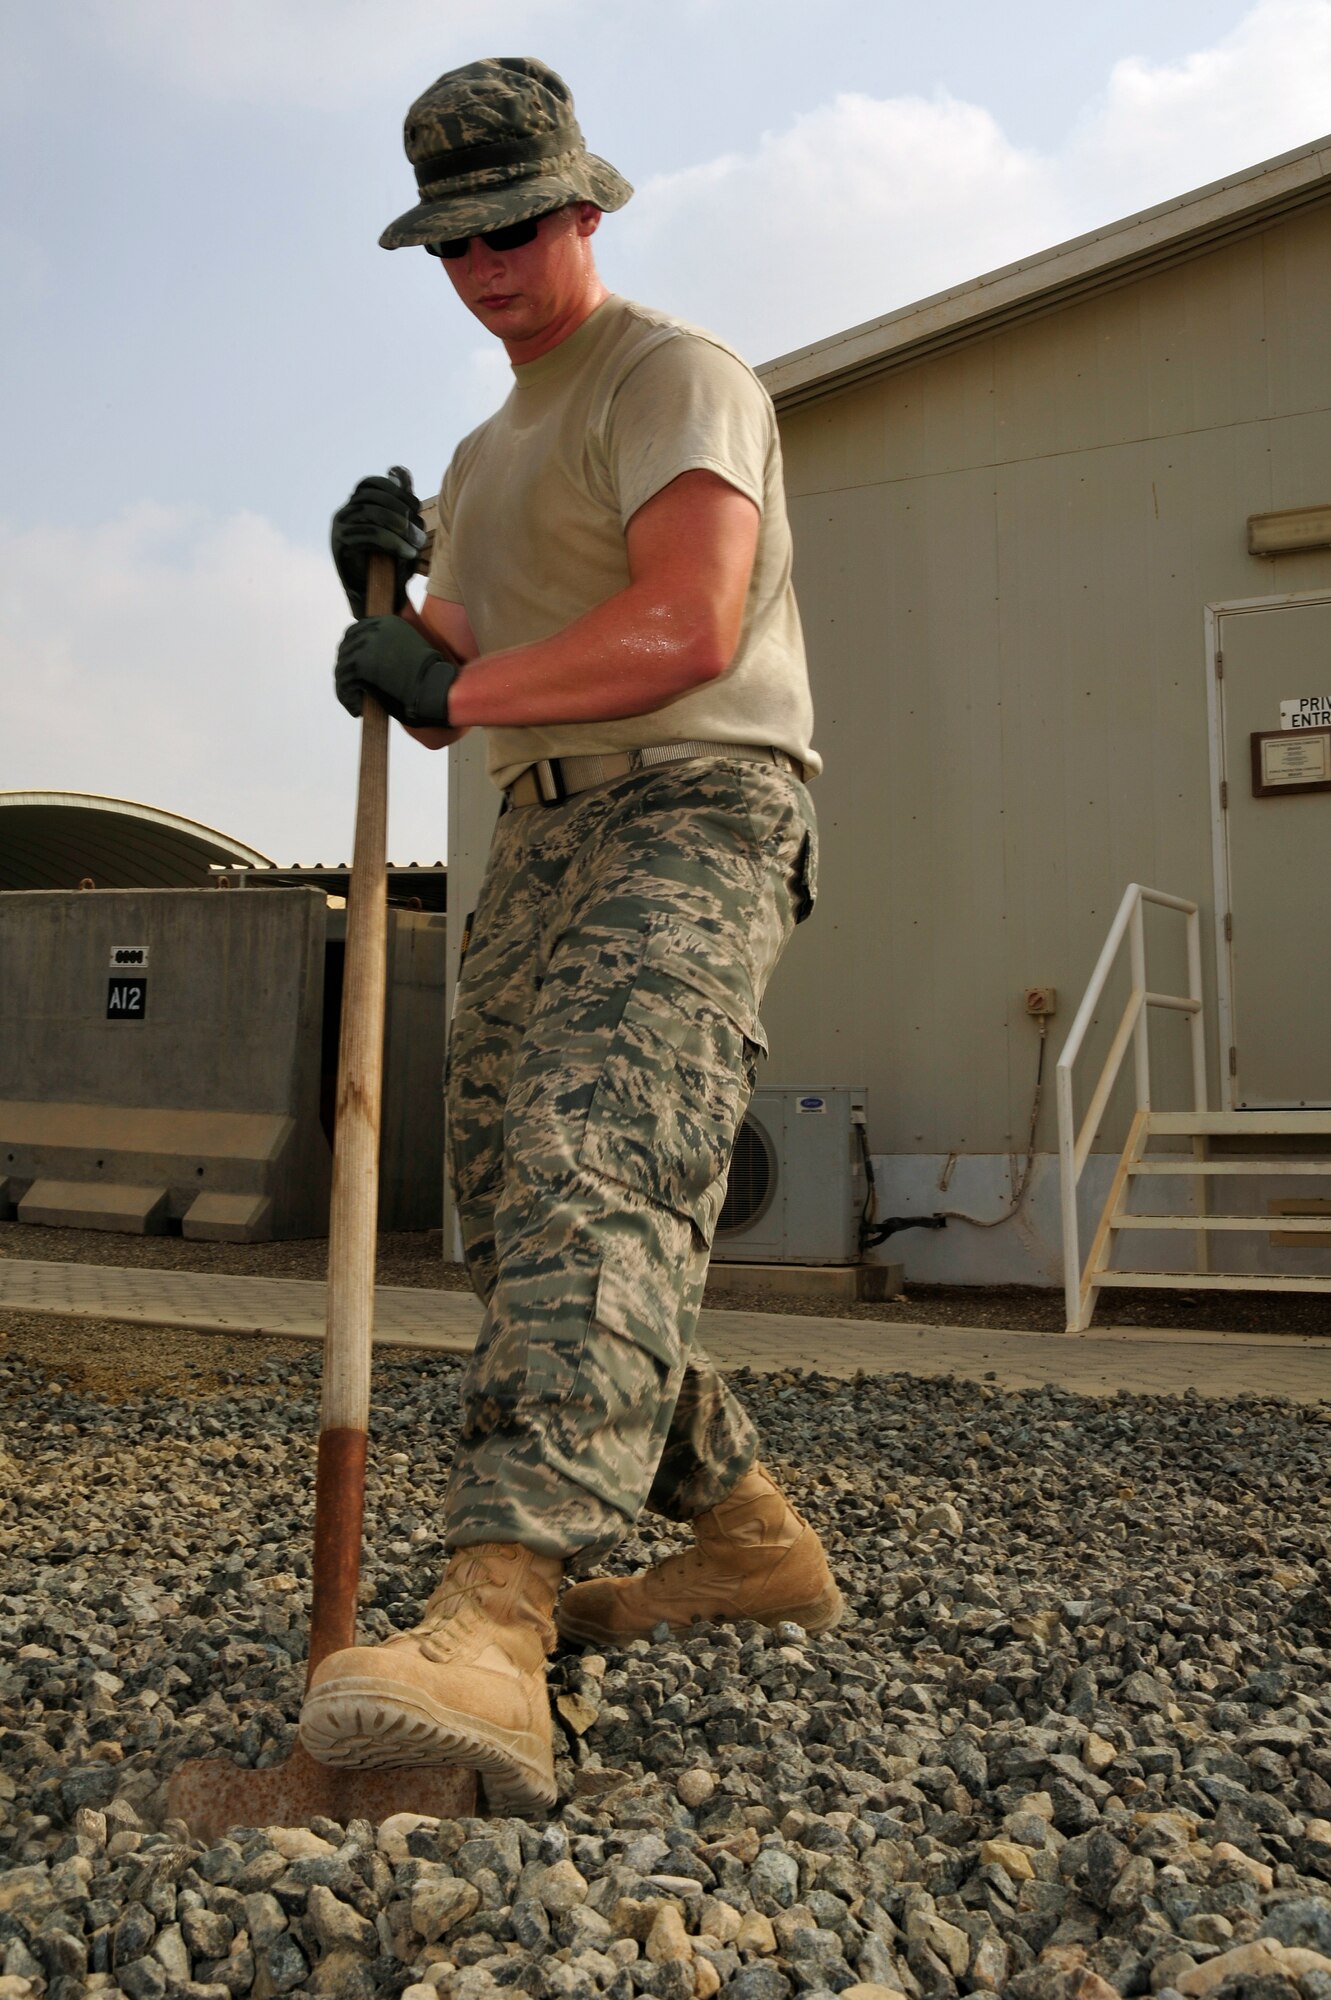 SOUTHWEST ASIA -Senior Airman Grant Coultas, 380th Expeditionary Civil Engineer Squadron, digs into gravel with a shovel to evenly spread the rocks while landscaping Sept. 03, 2009. Airman Coultas is deployed from Little Rock Air Force Base, Ark., and grew up in Bellevue, Neb. (U.S. Air Force photo/Tech. Sgt. Charles Larkin Sr)